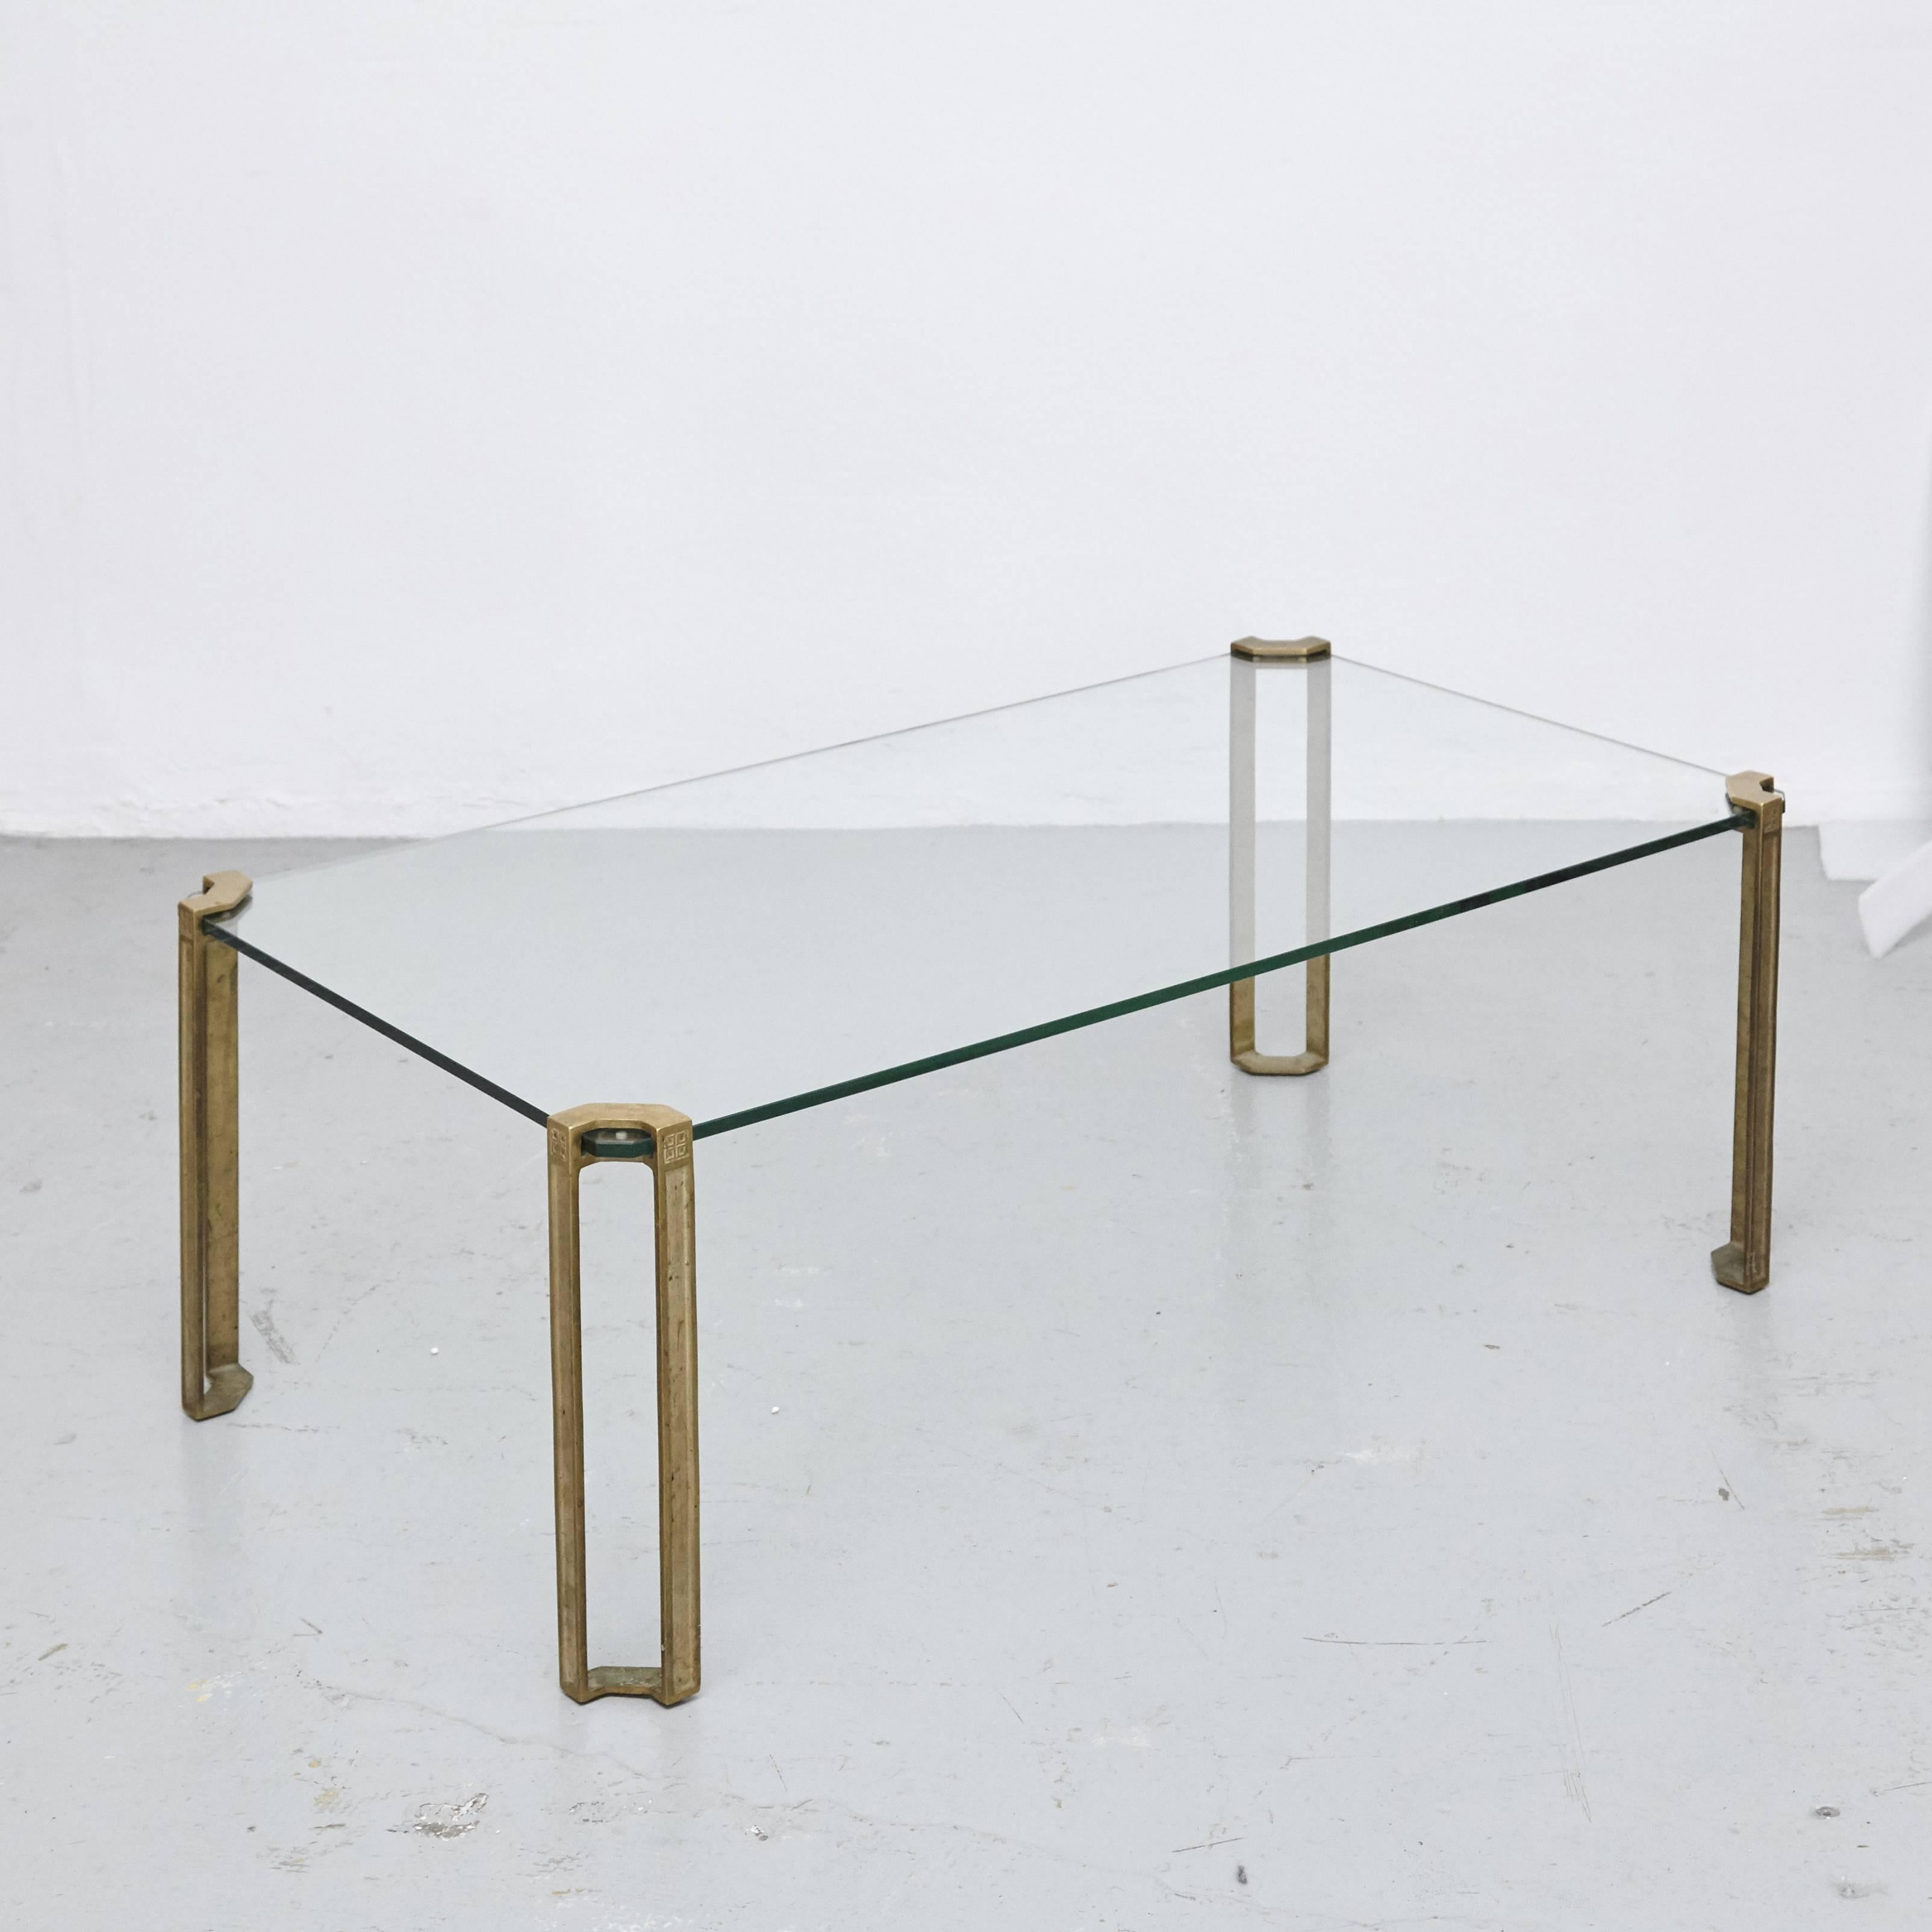 Peter Ghyczy Glass Low Table, circa 1970

The table is made from glass and sand casted brass. The legs are hand casted by very skilled craftsmen in the Netherlands. The brass has typical characteristics of the casting process and only some parts are